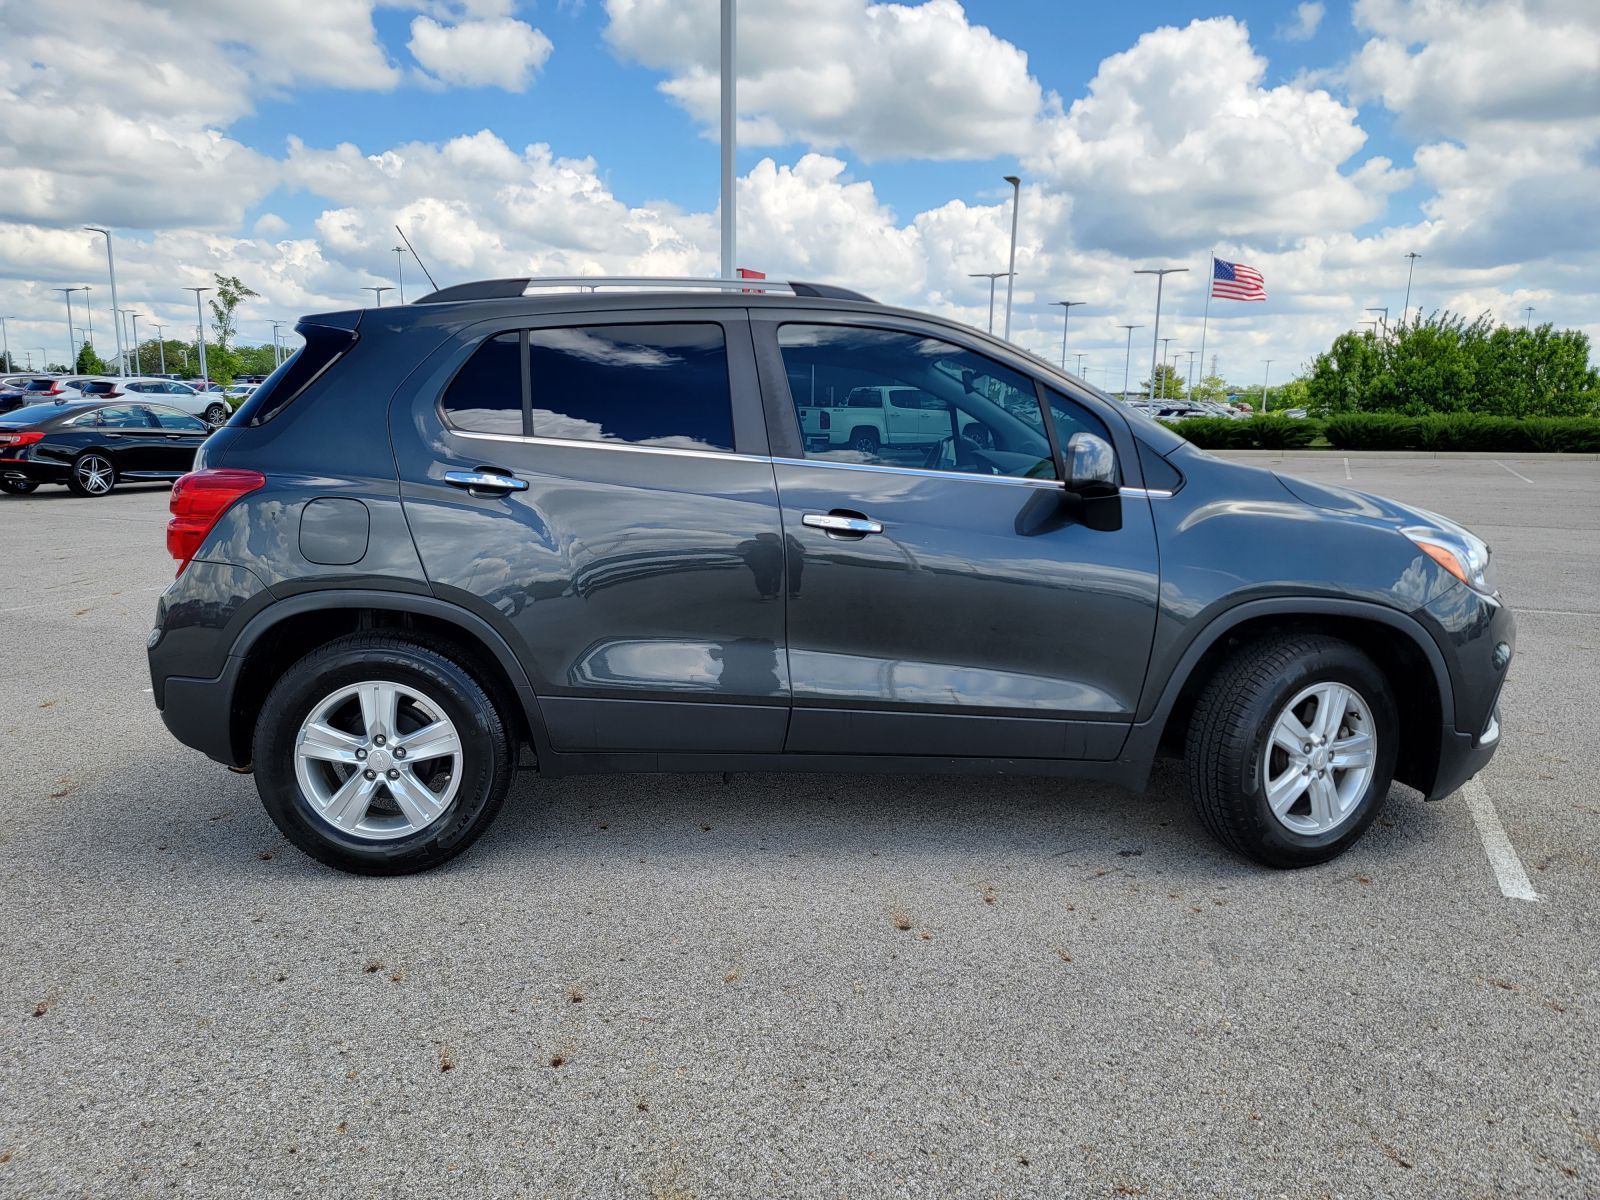 Used, 2019 Chevrolet Trax LT, Gray, G0449A-8